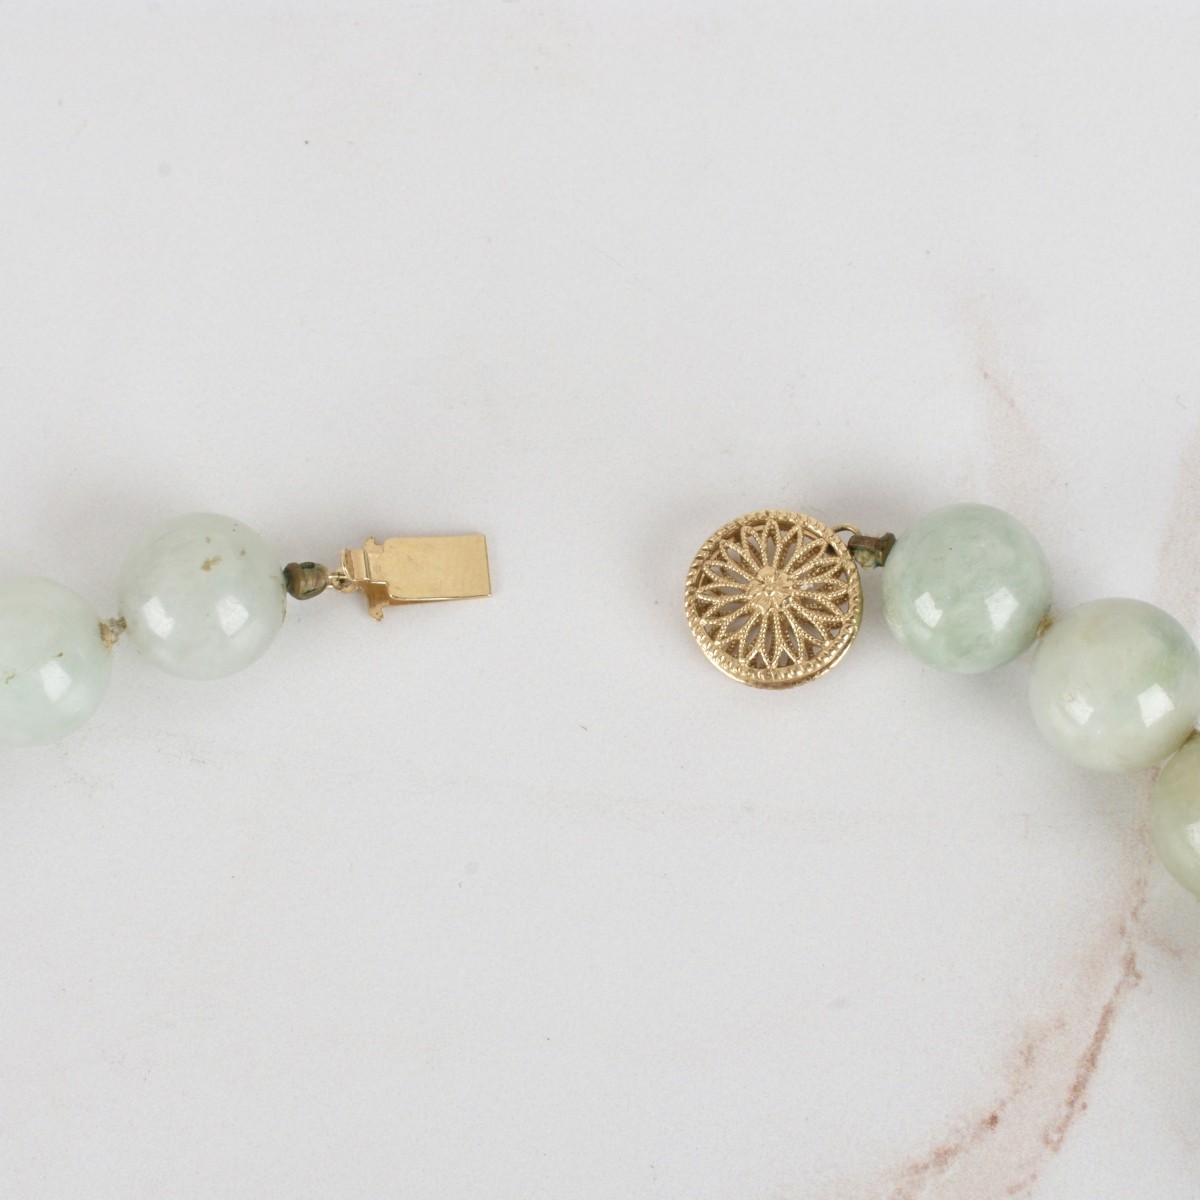 Jade Bead and 14K Necklace